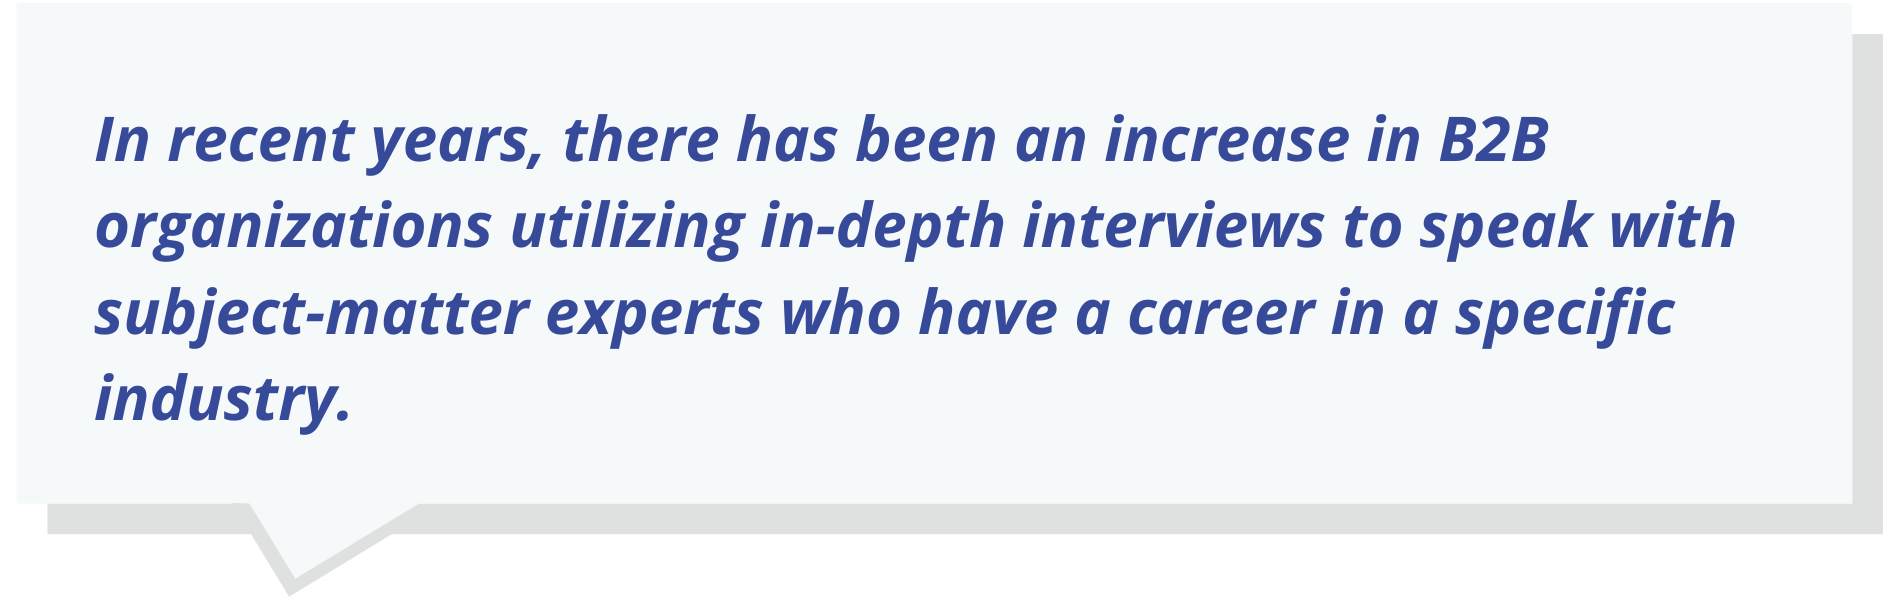 In recent years, there has been an increase in B2B organizations utilizing in-depth interviews to speak with subject-matter experts who have a career in a specific industry.